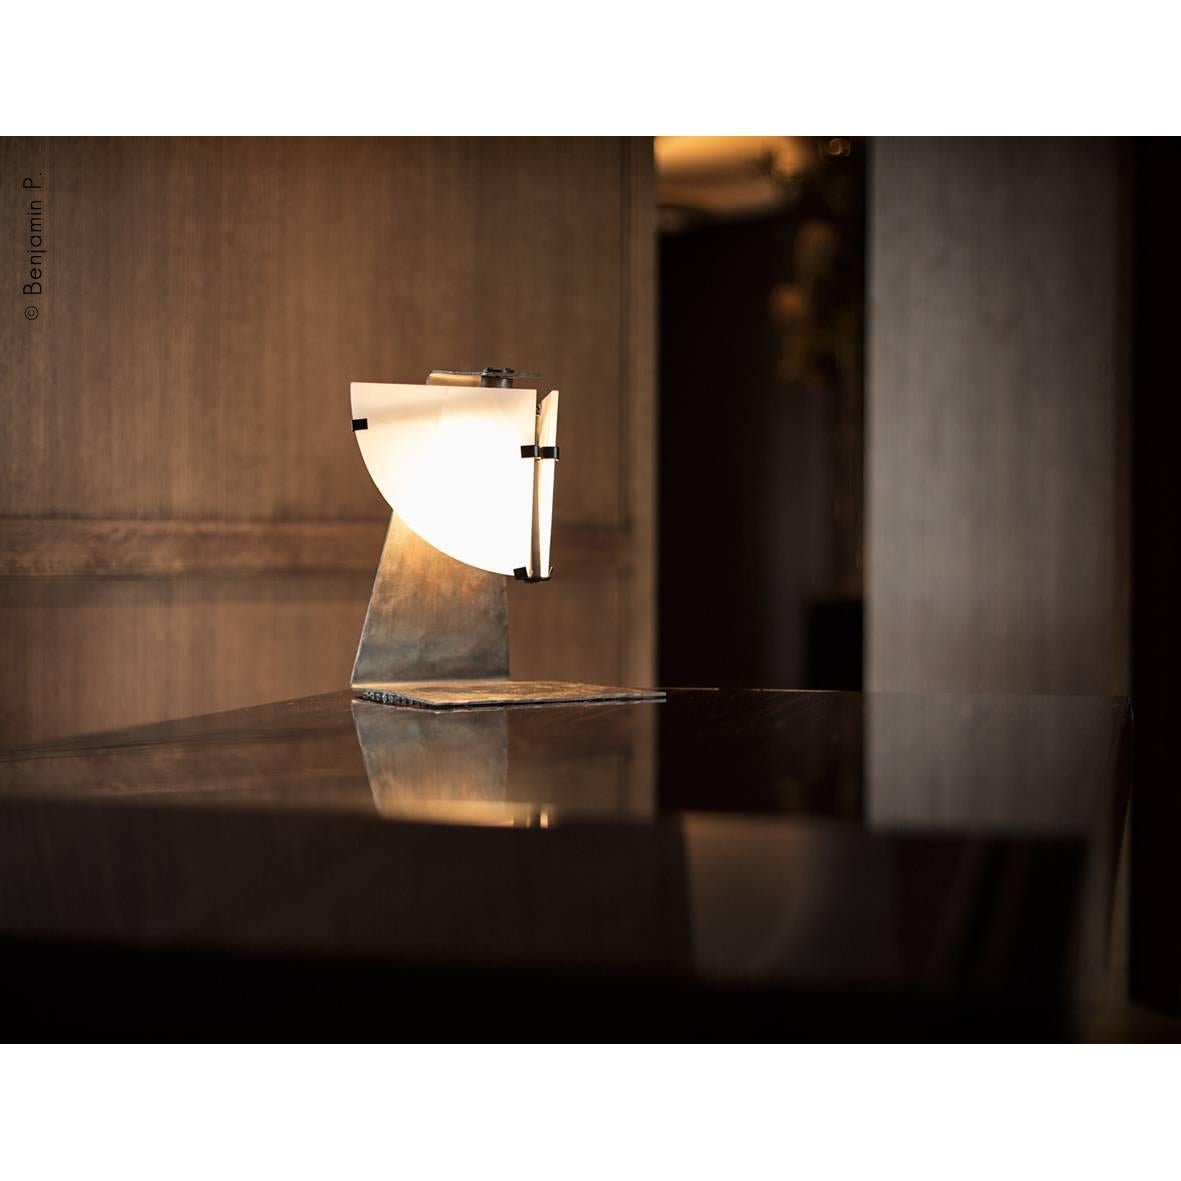 Quart de Rond table lamp originally designed  by Pierre Chareau in France, 1922. Current production by Galerie MCDE. Composed of two panels of alabaster in quarter-wedges adjustable. Base in forged blackened metal and darkened wrought iron and